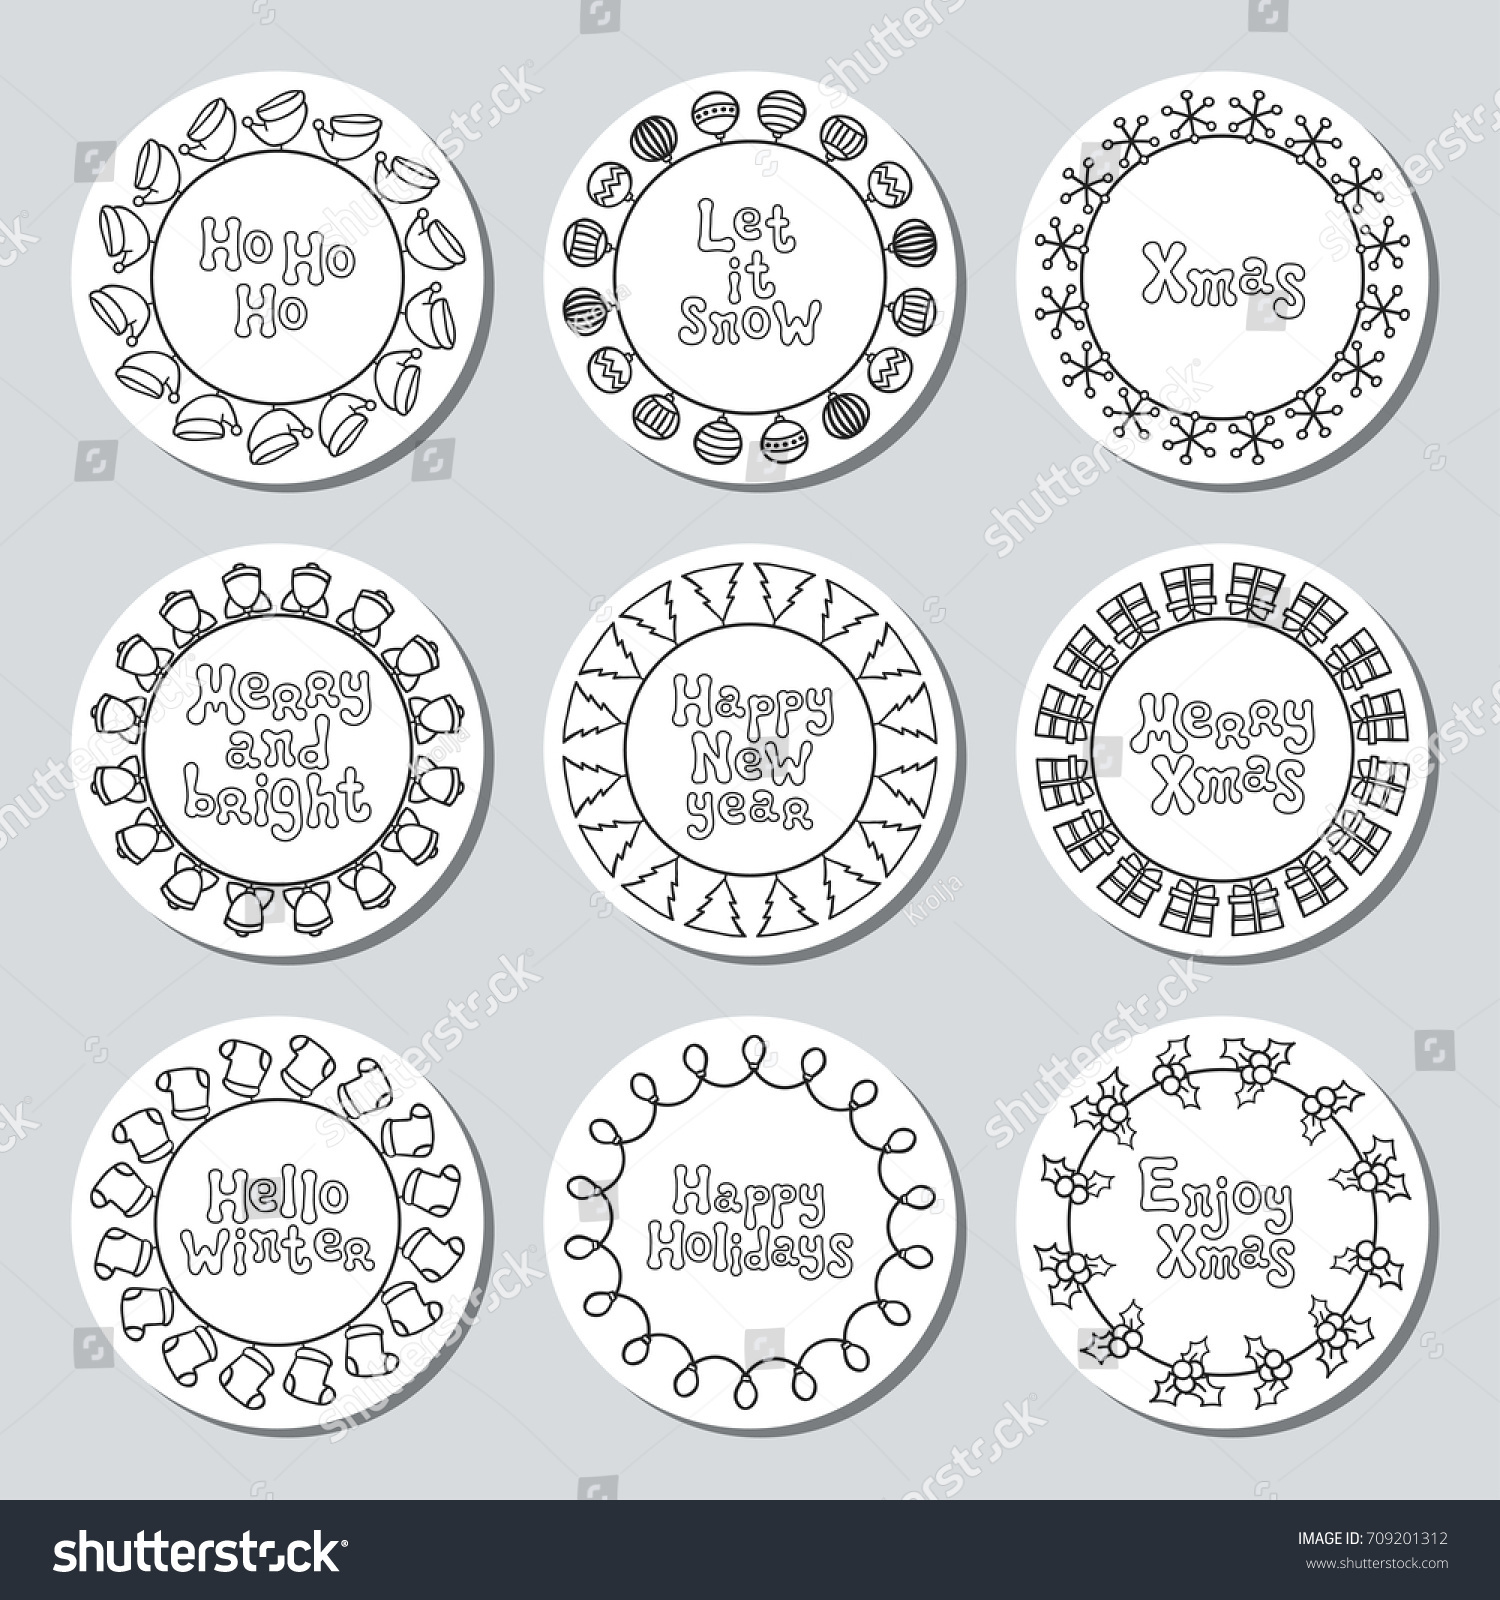 Christmas New Year t round stickers Labels and badges xmas set Hand drawn decorative